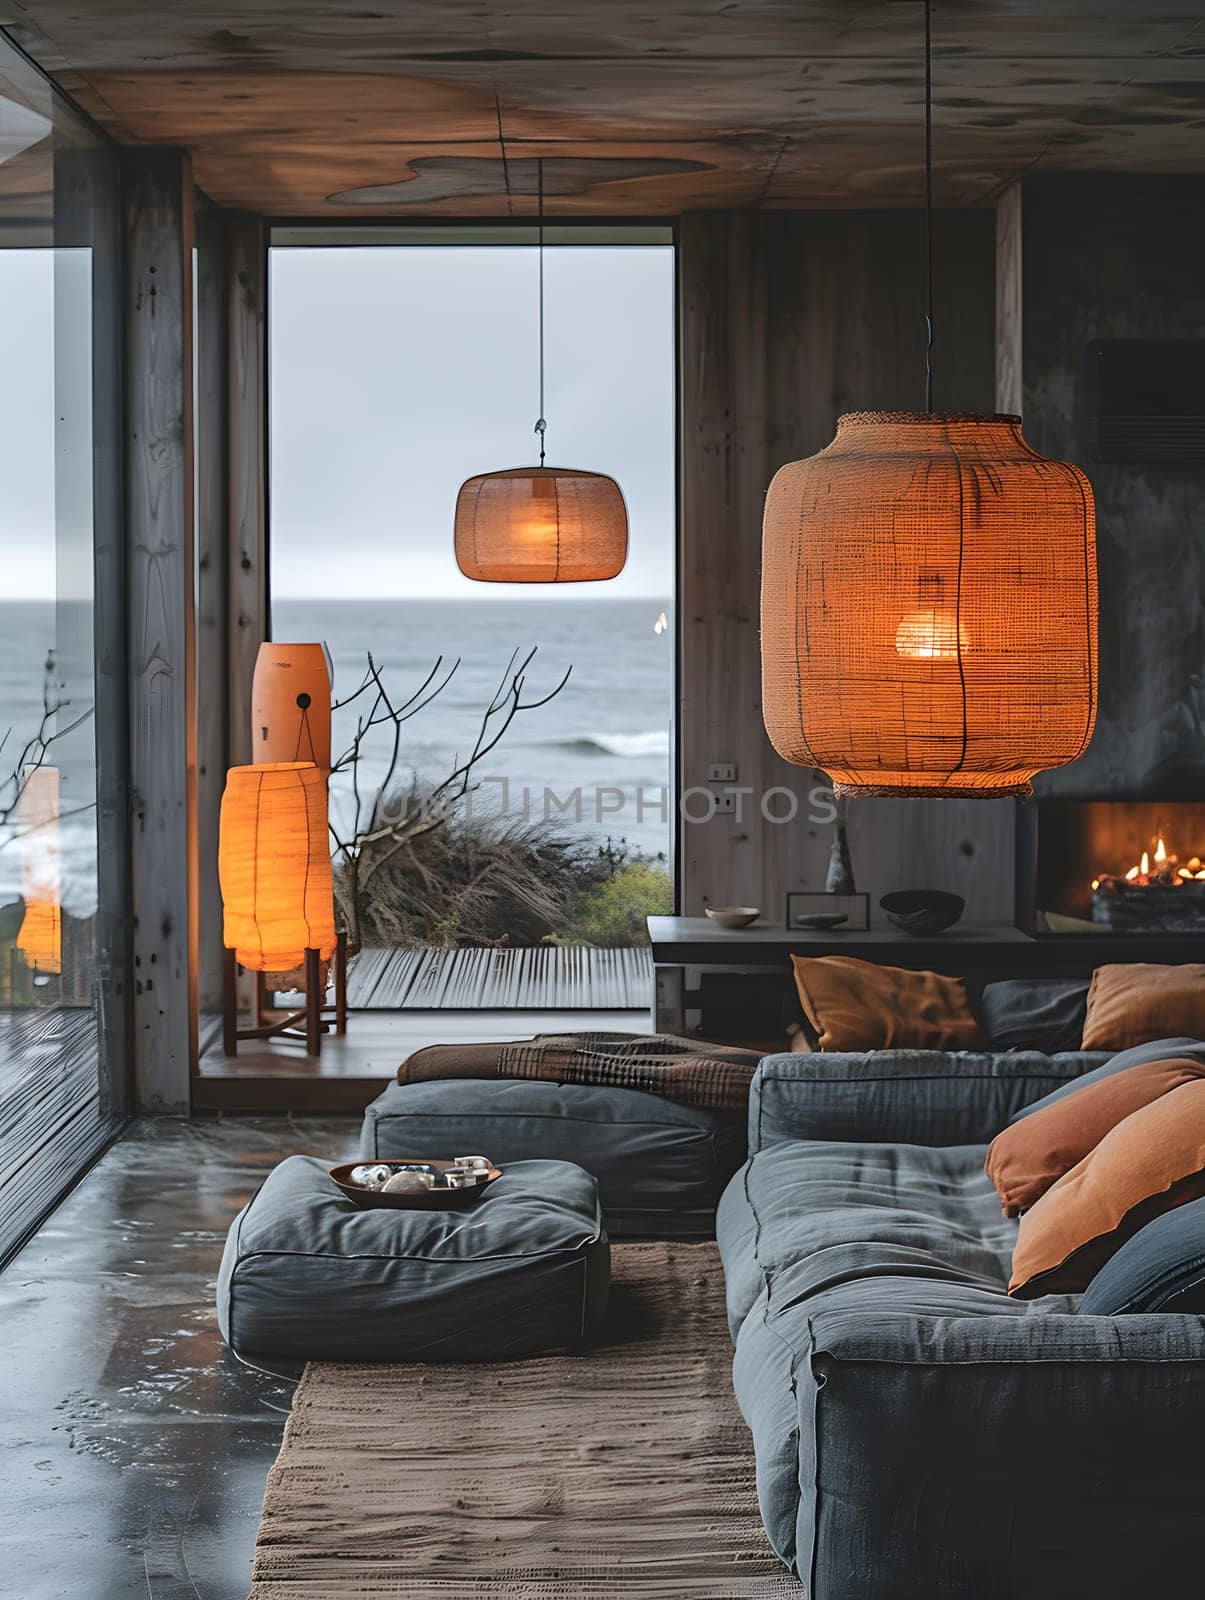 An interior design featuring a living room in a building with a window overlooking the ocean, a couch, fireplace, wooden furniture, orange accents, plants, a lamp, and a table